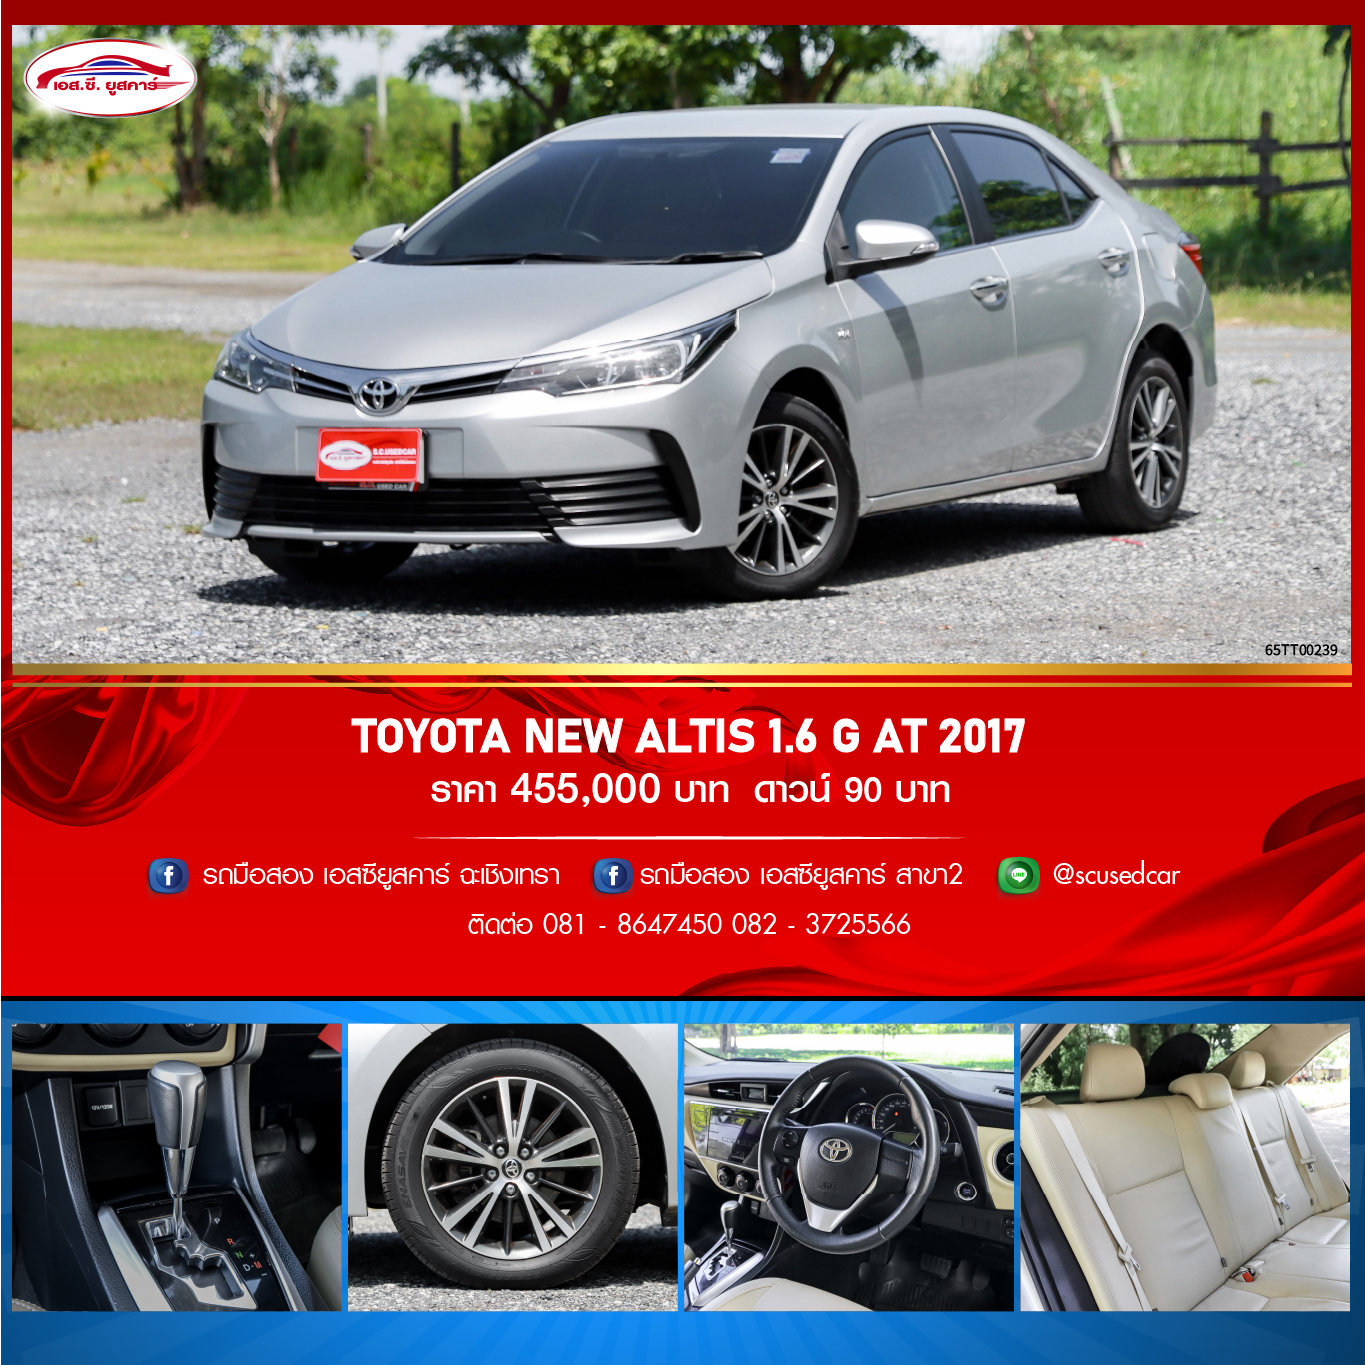 TOYOTA NEW ALTIS 1.6 G AT 2017